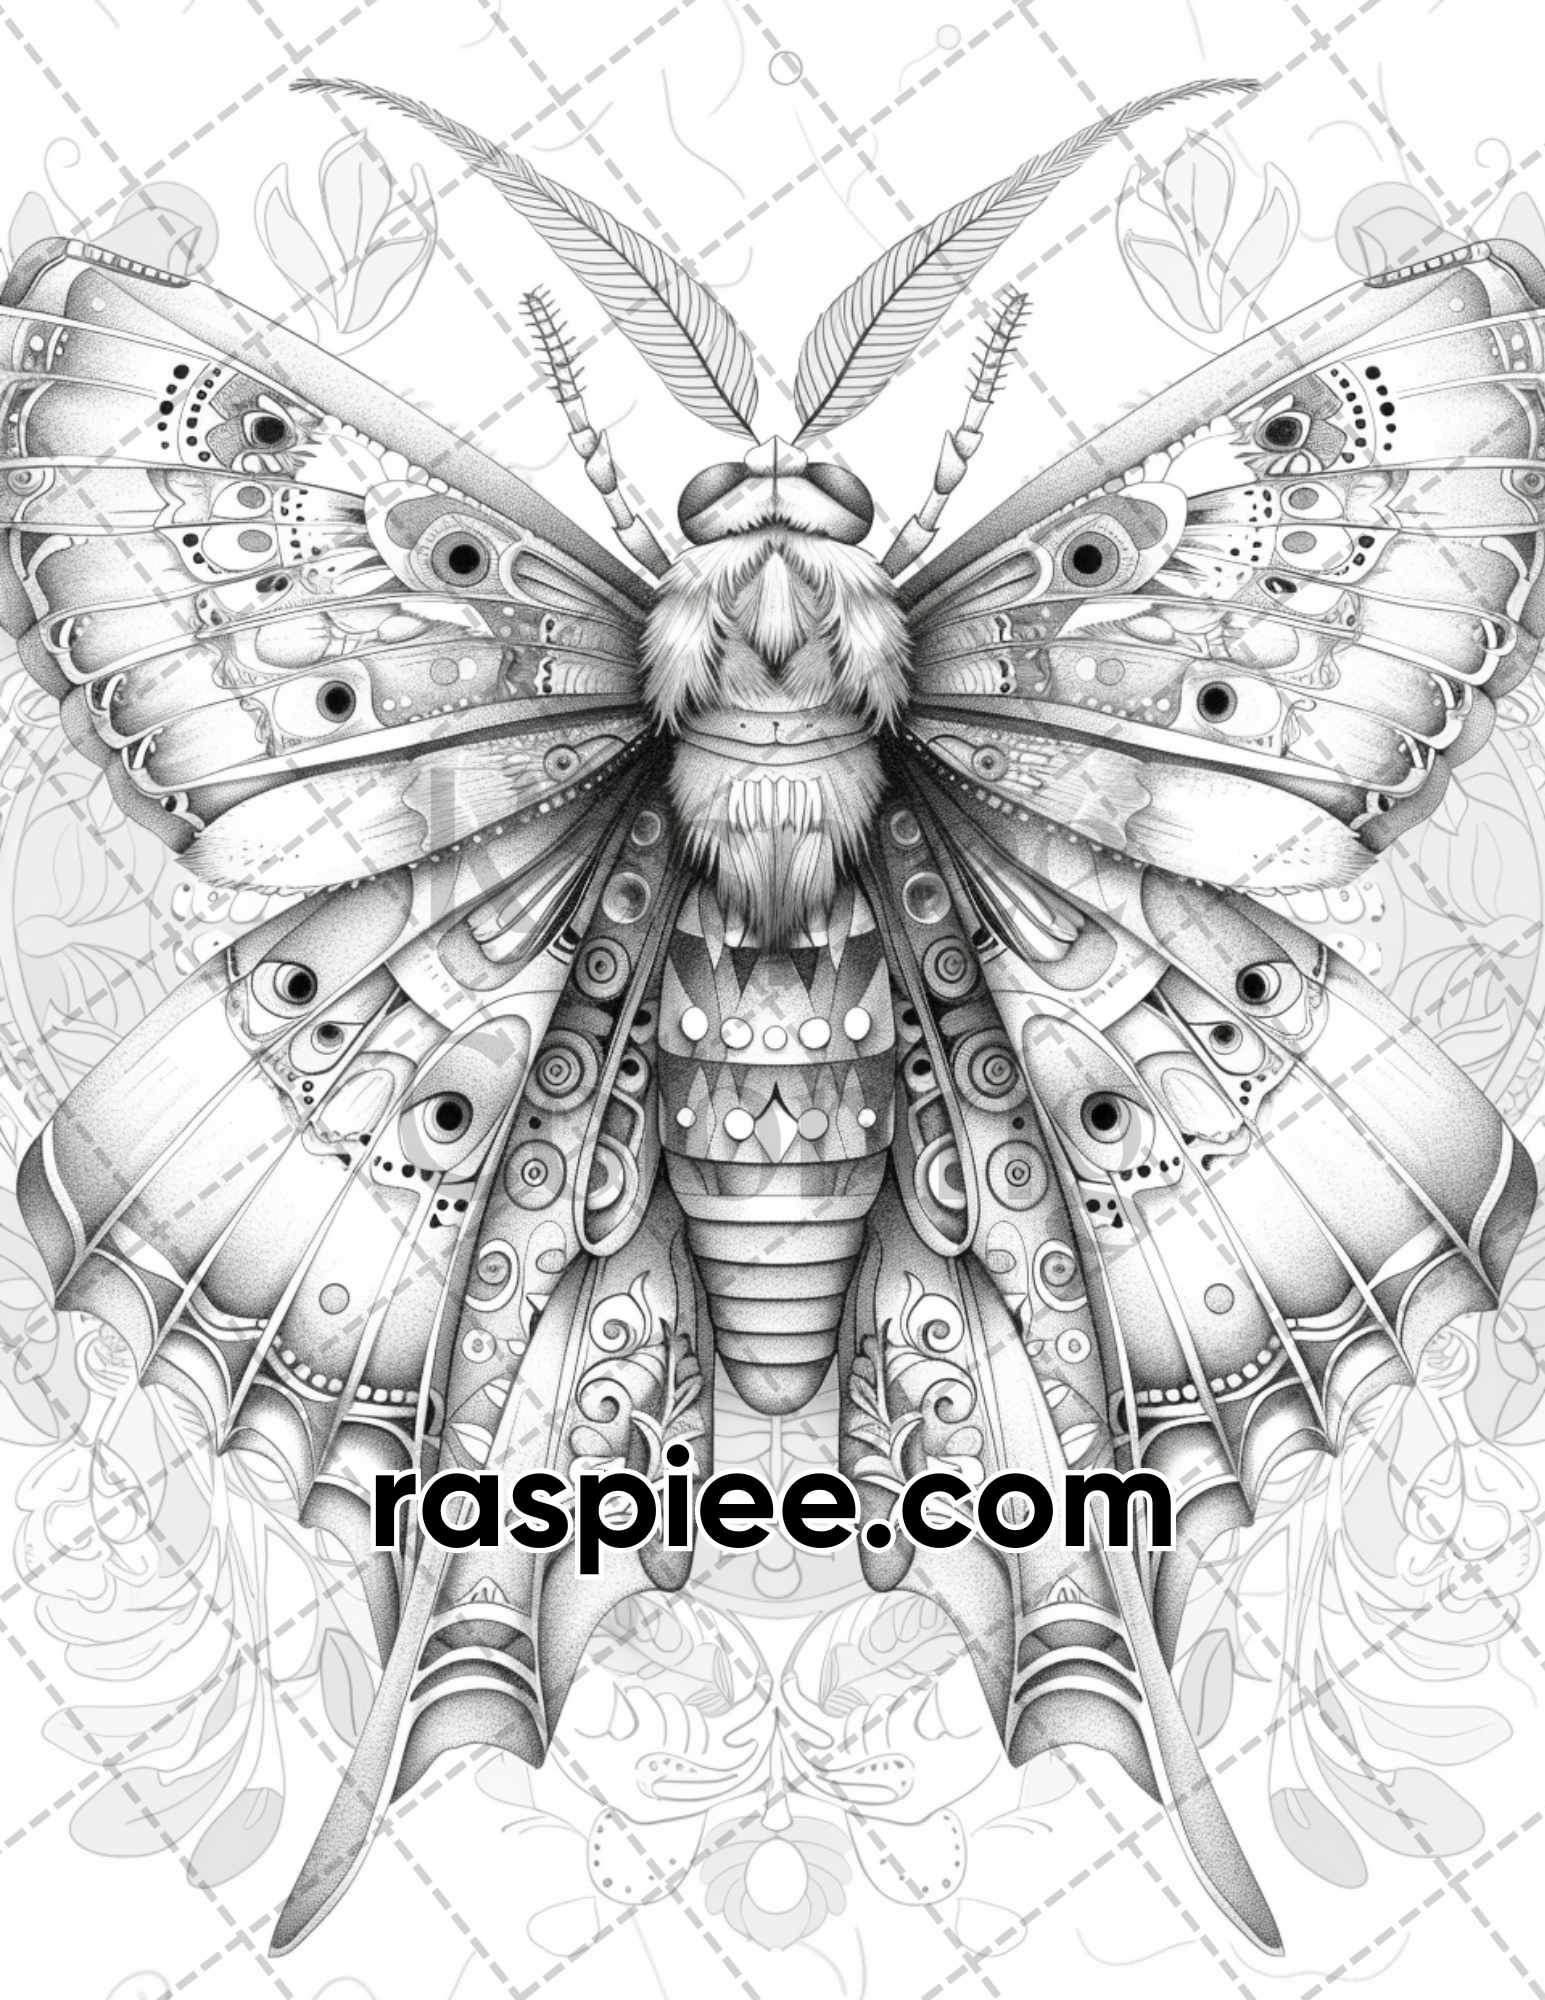 adult coloring pages, adult coloring sheets, adult coloring book pdf, adult coloring book printable, grayscale coloring pages, grayscale coloring books, insect coloring pages for adults, insect coloring book, grayscale illustration, Butterflies and Moths Grayscale Adult Coloring Pages 